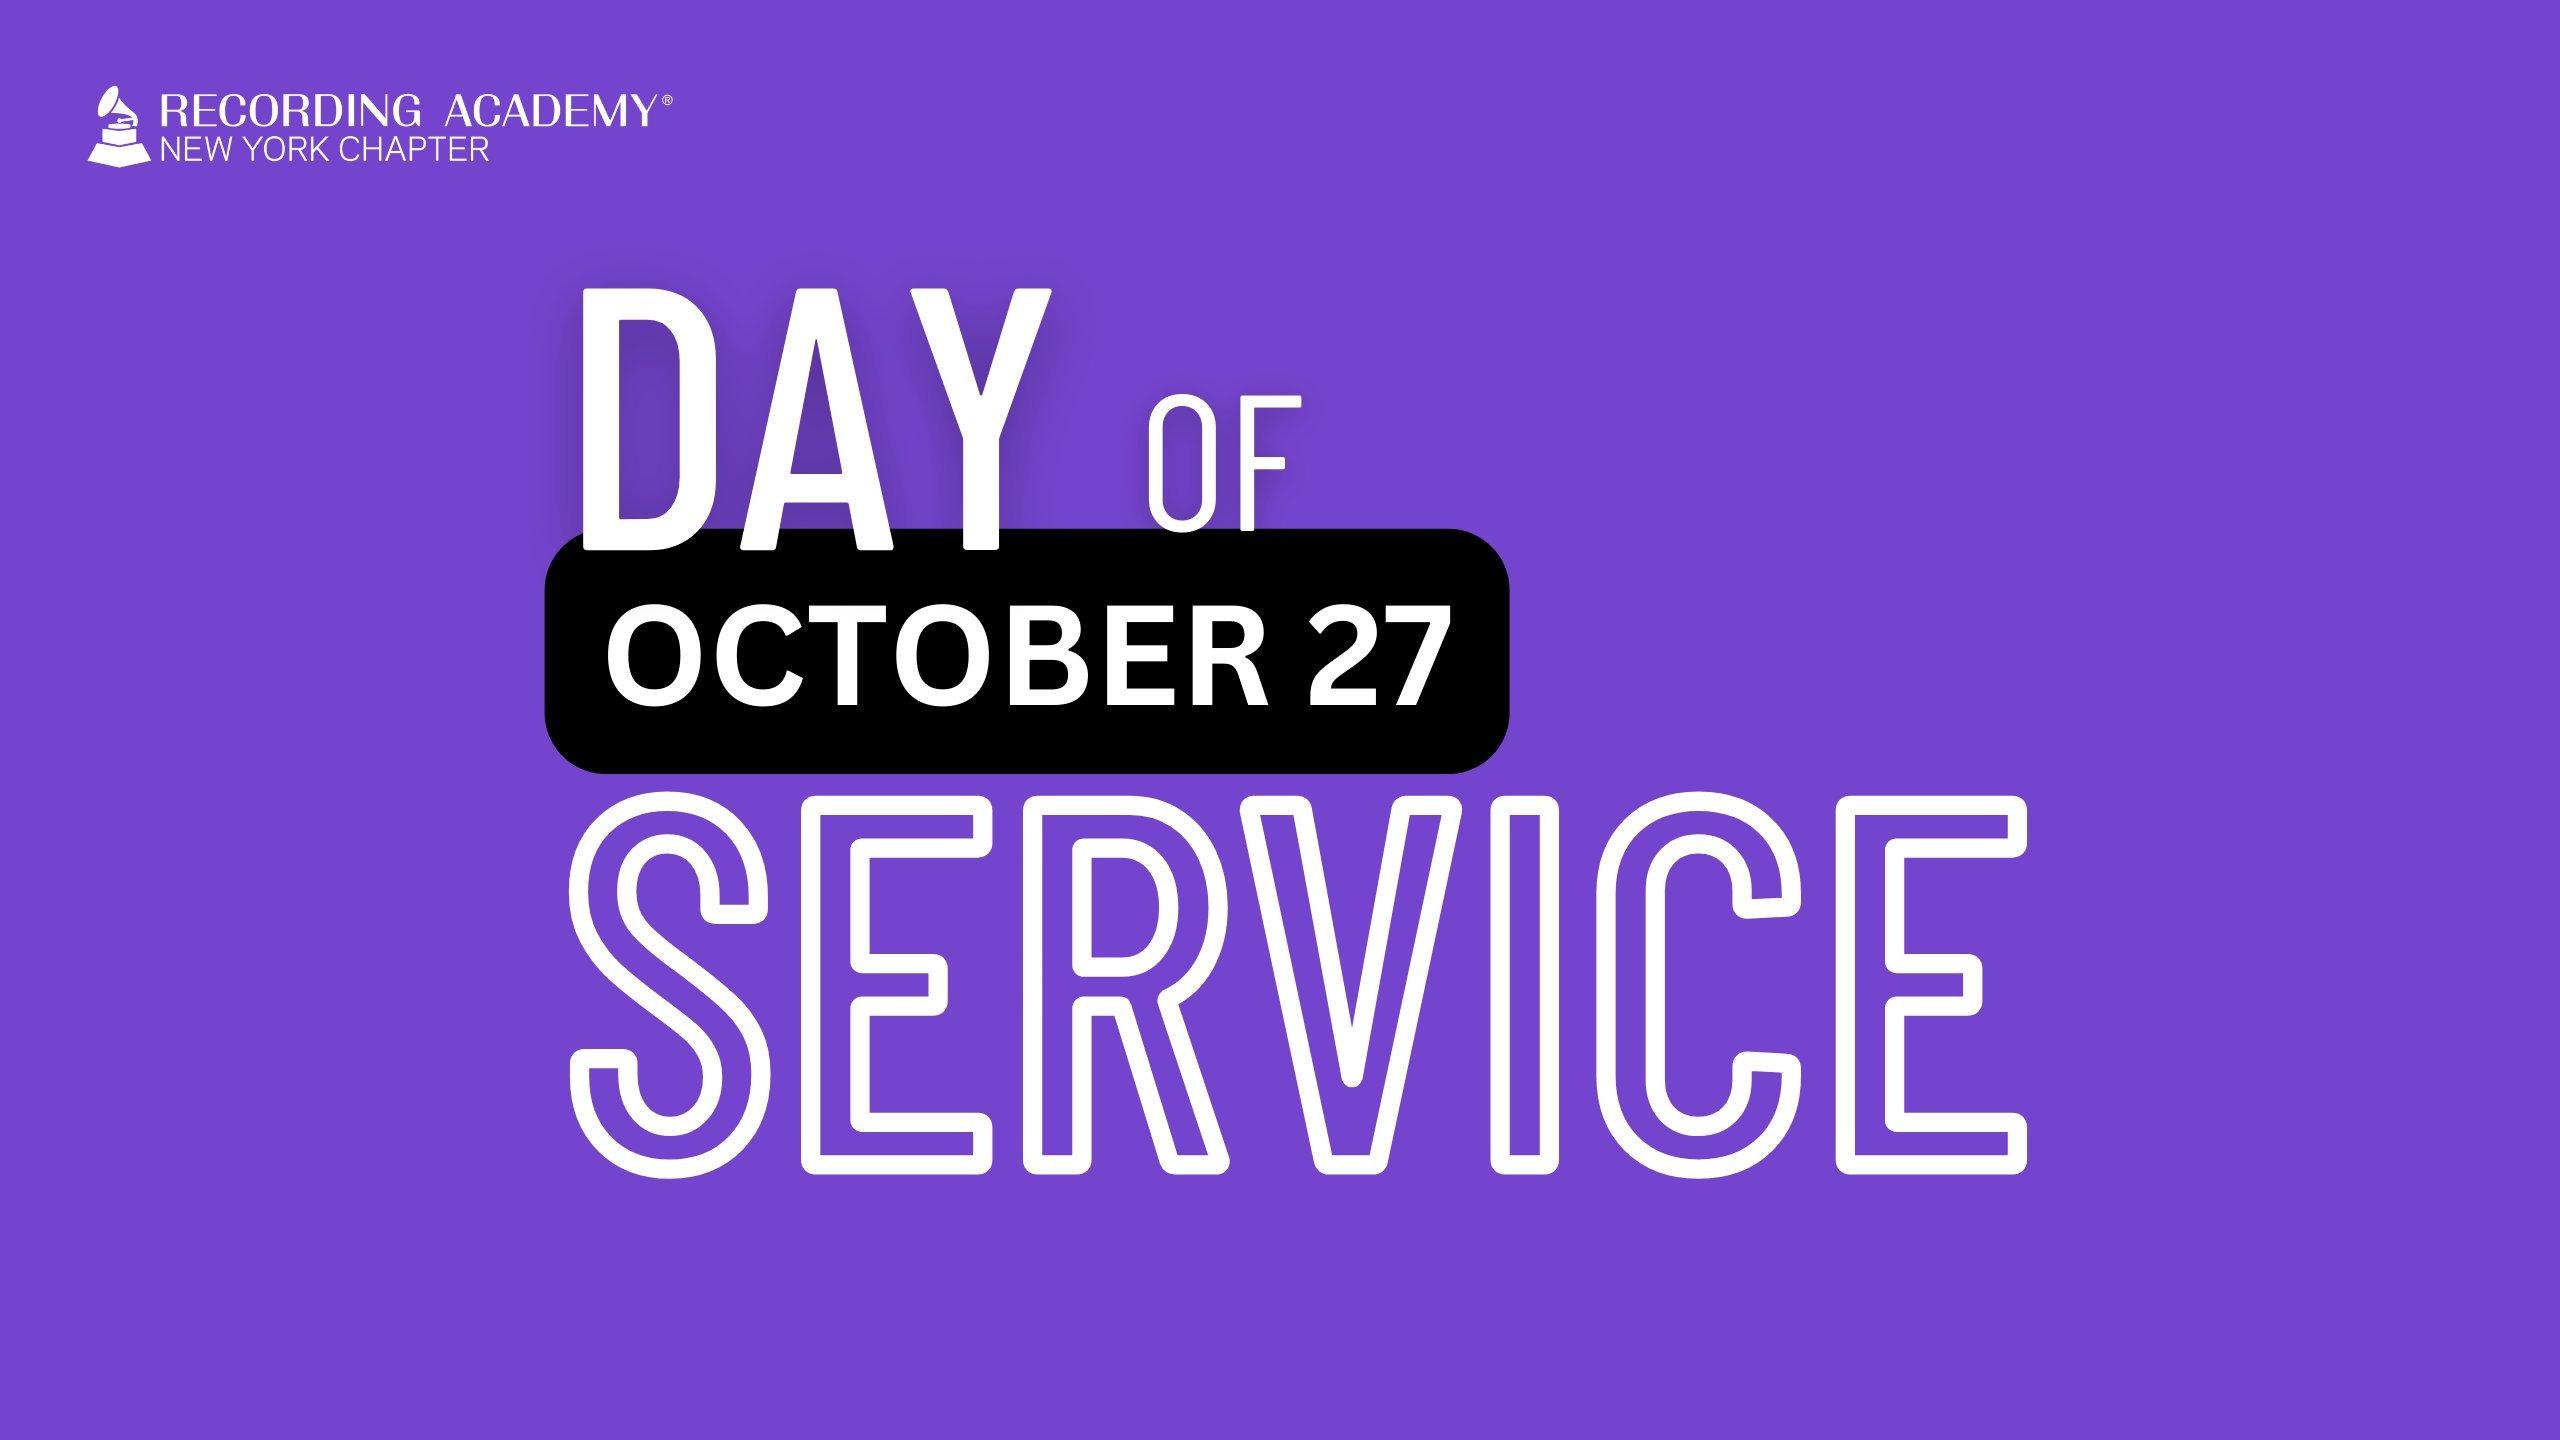 Graphic of the Recording Academy's New York Chapter’s Day of Service